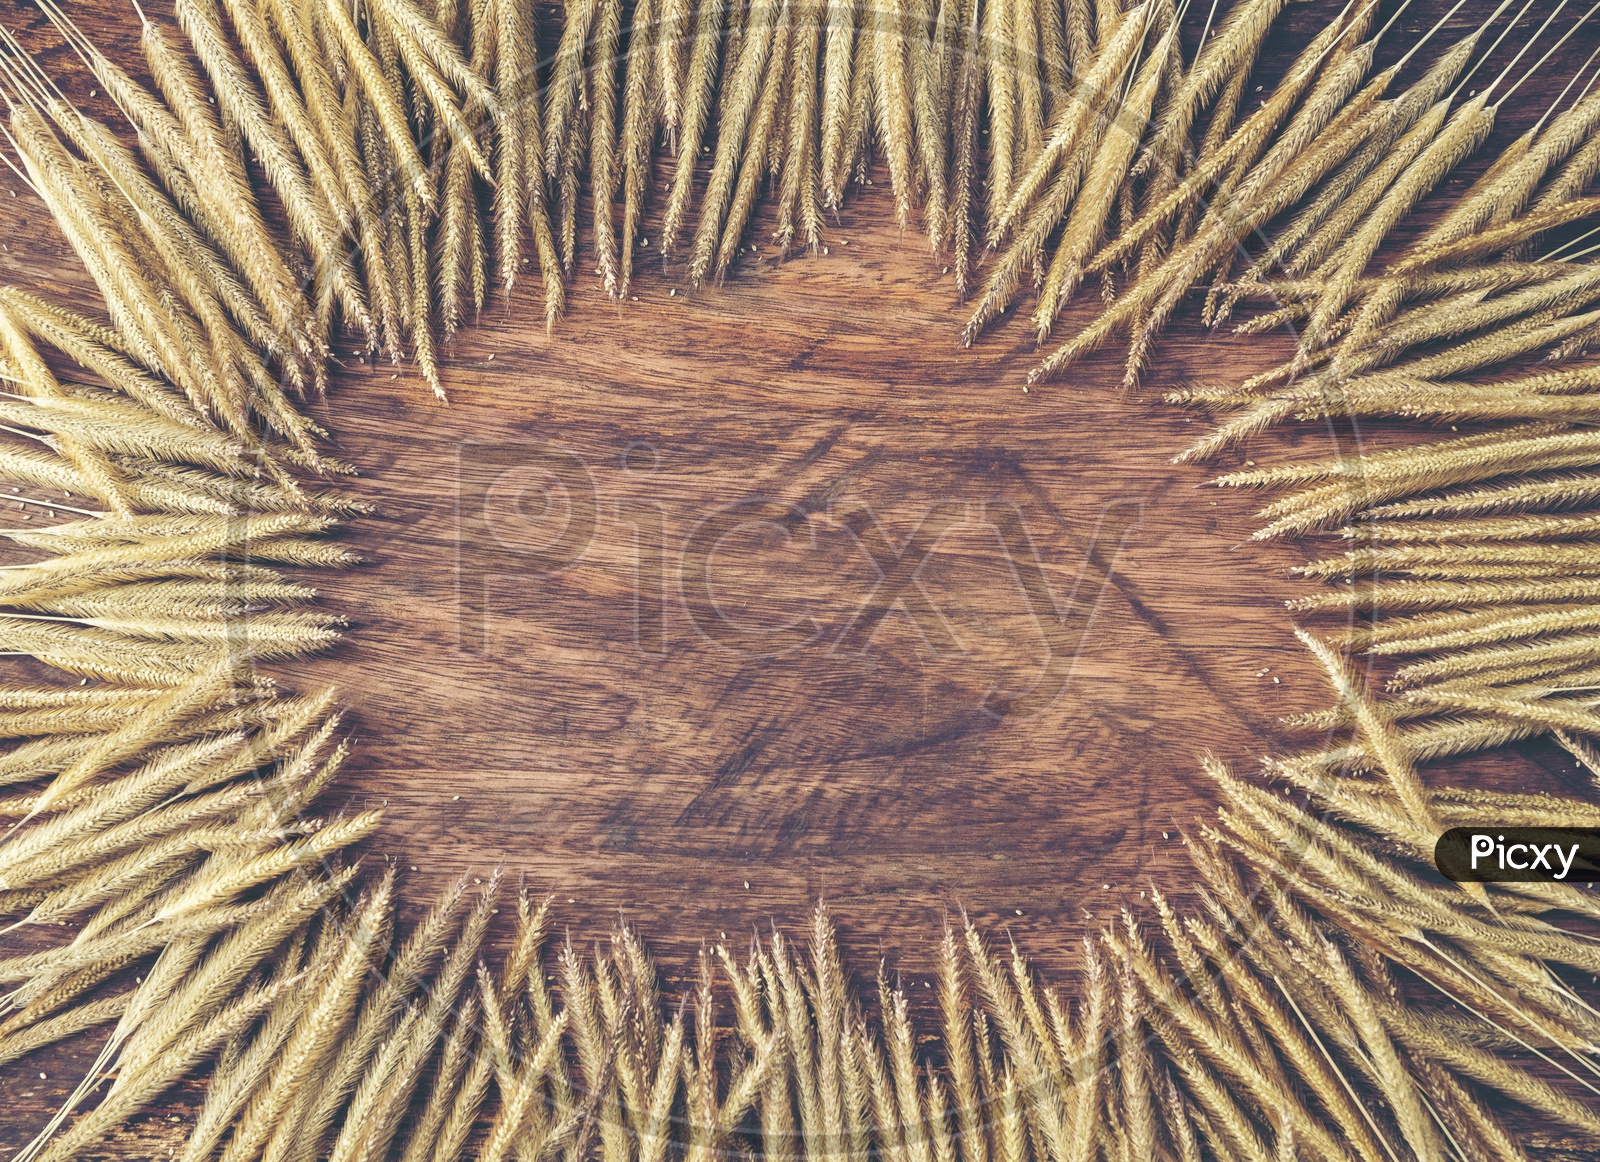 Dry grass frame on wood background with vintage filter effect